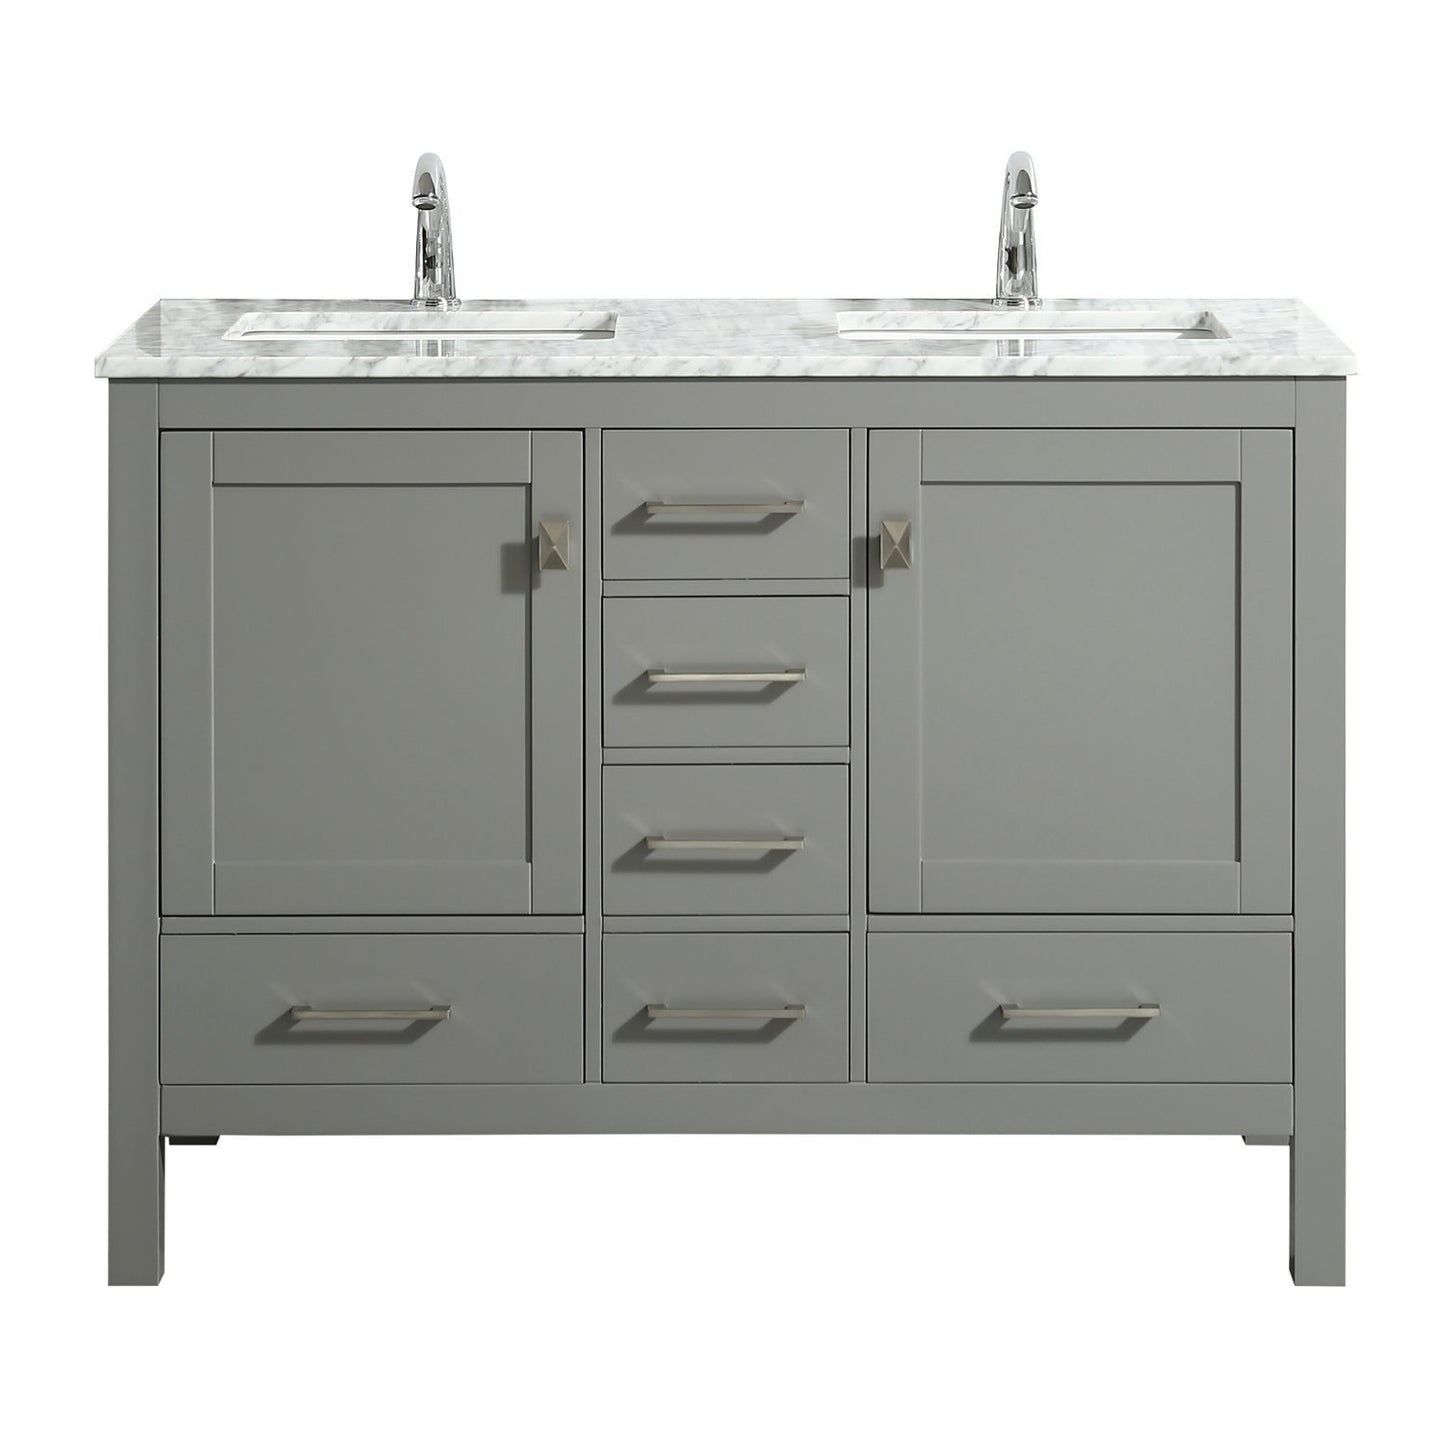 Eviva London 48" X 18" Transitional bathroom vanity with white Carrara marble and double Porcelain Sinks - Luxe Bathroom Vanities Luxury Bathroom Fixtures Bathroom Furniture